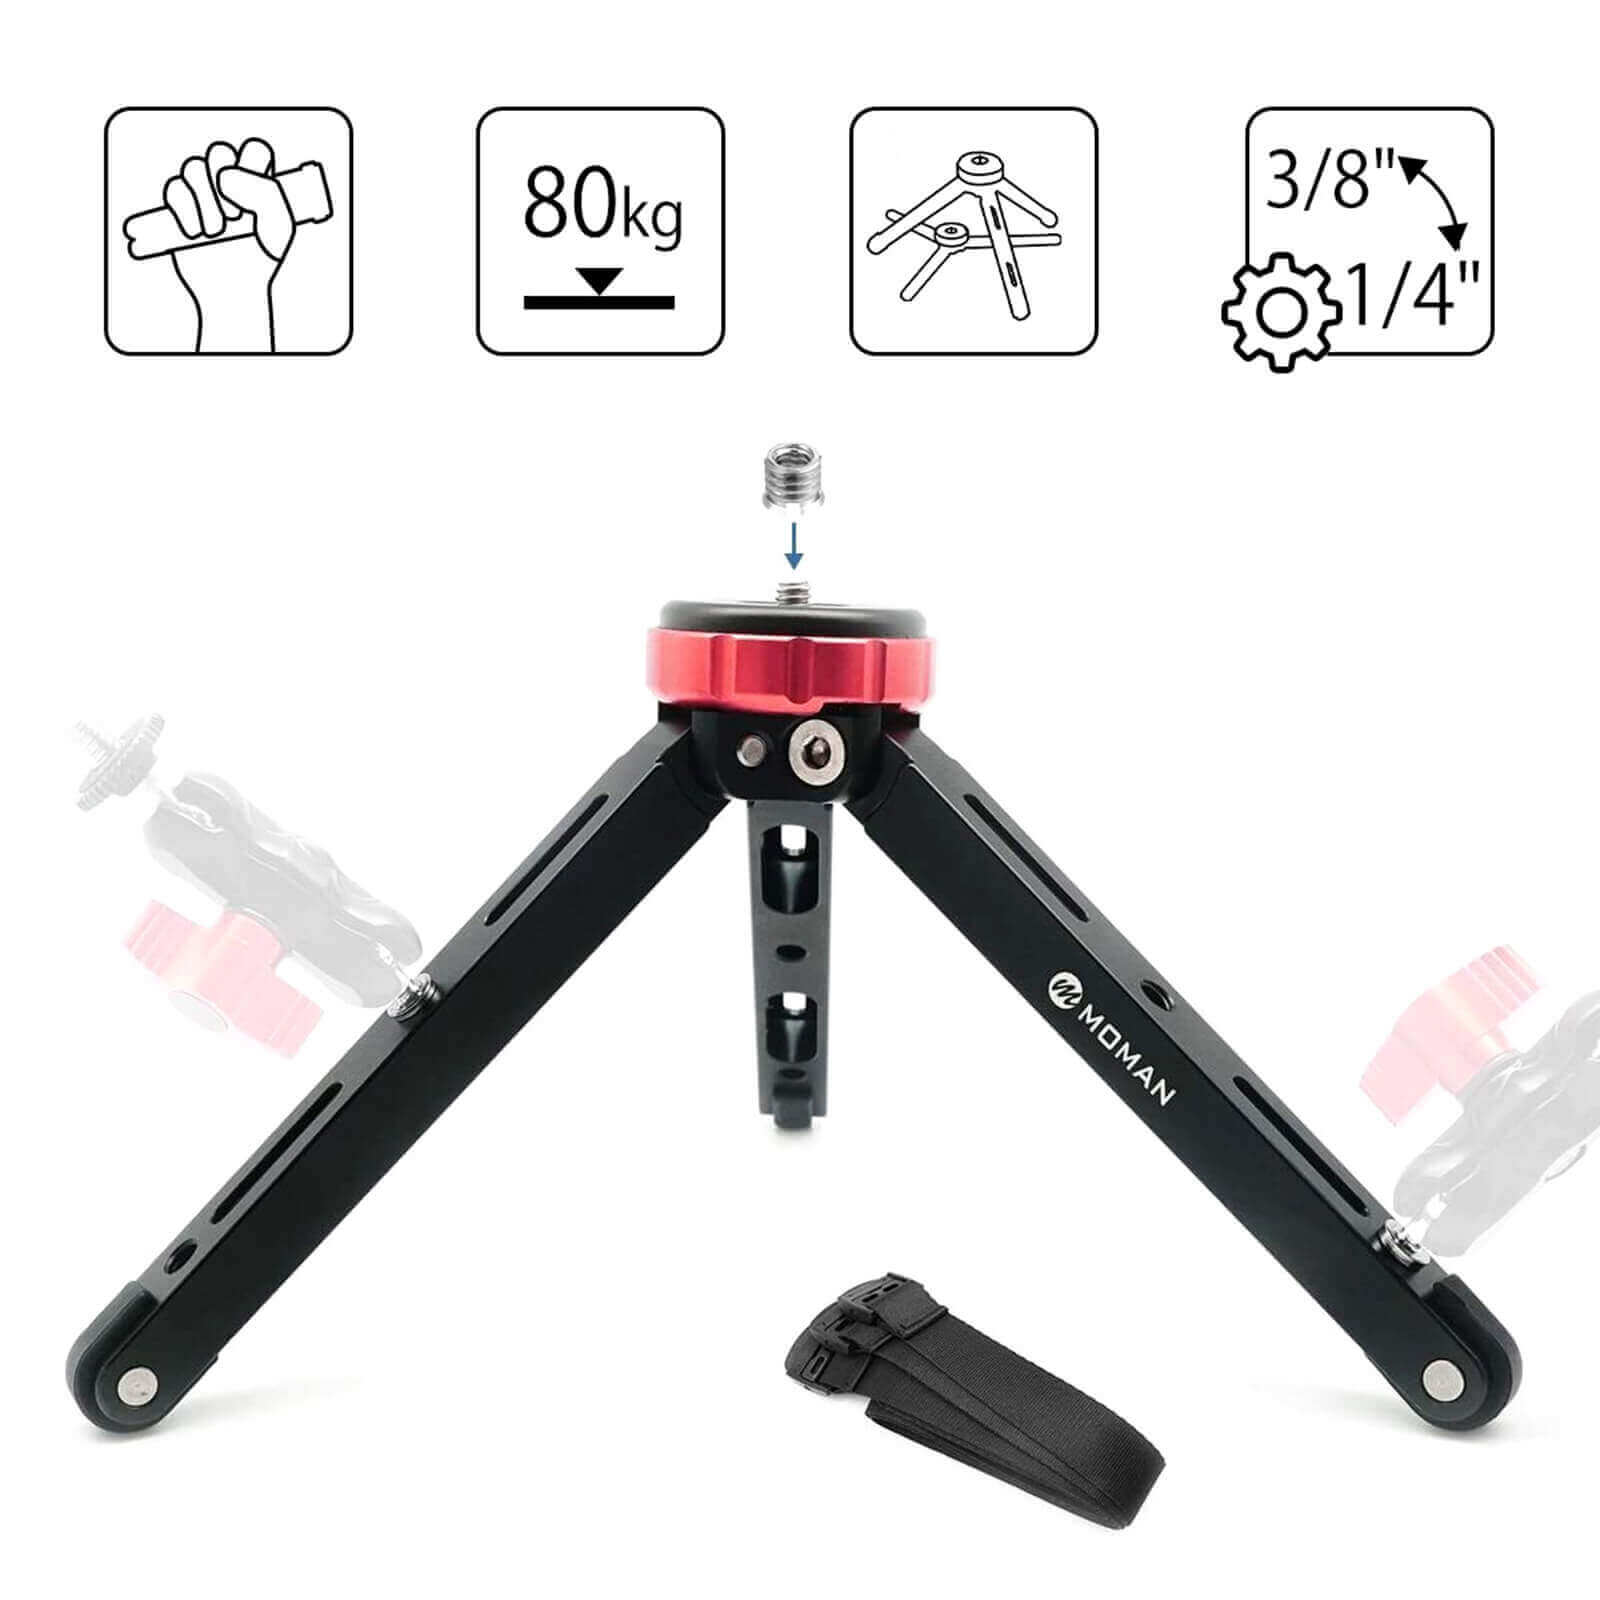 Moman TR01 Red tabletop tripod features anti-slip design for better holding and a max payload of 80kg